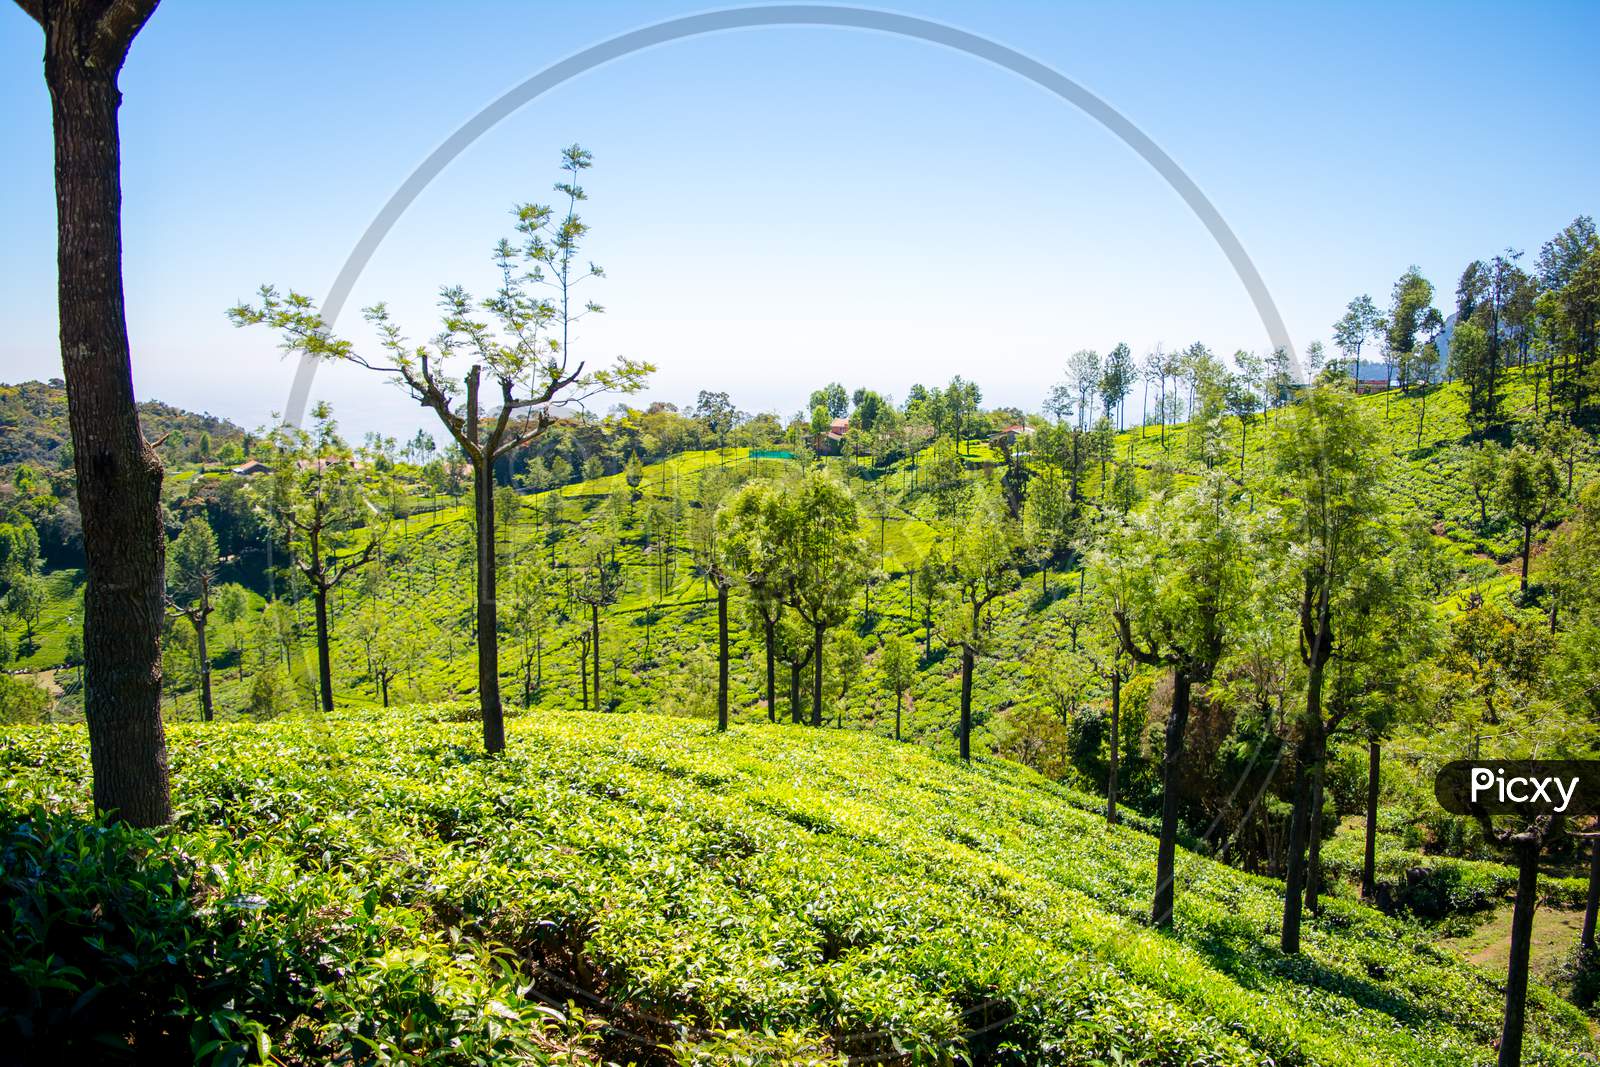 Beautiful view of tea garden and Ooty city of Tamil Nadu